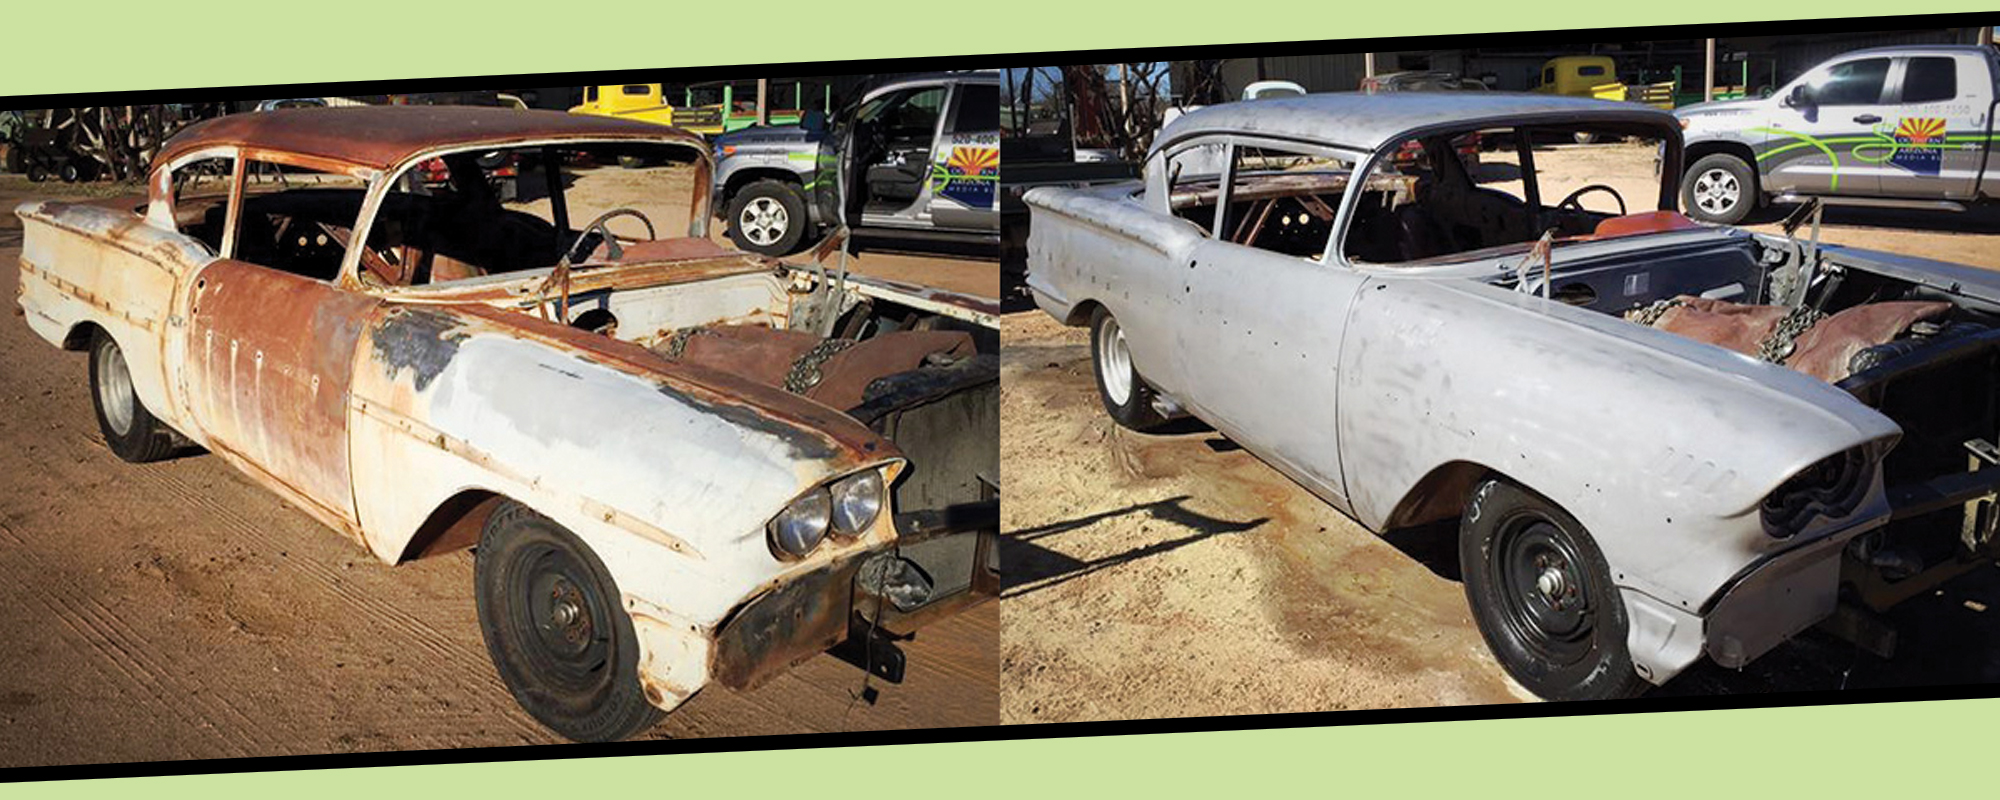 Vehicle Before and After removal